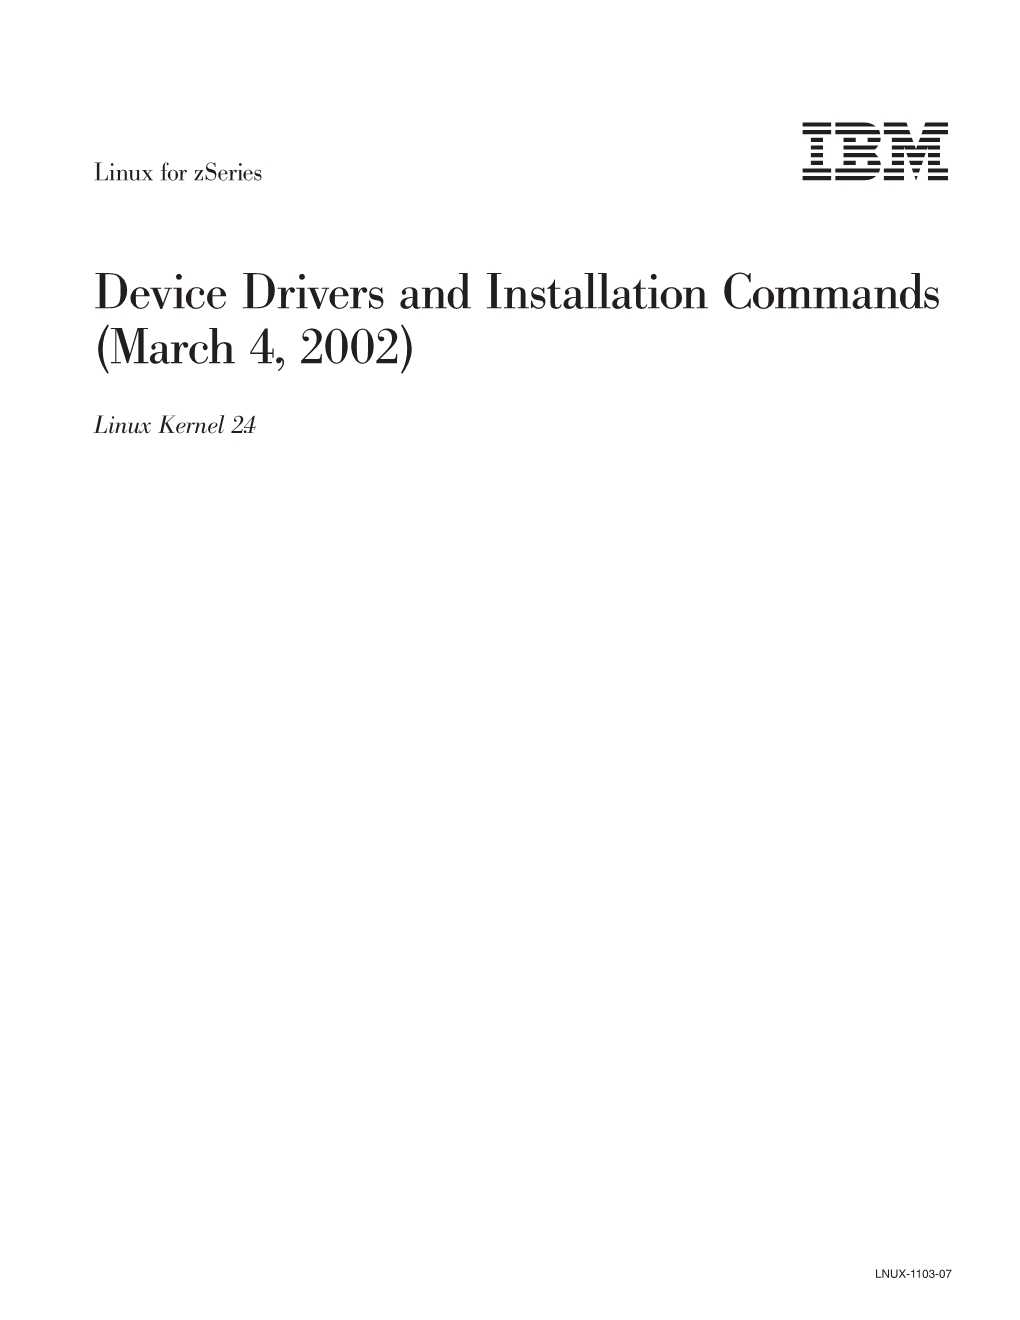 Linux for Zseries: Device Drivers and Installation Commands (March 4, 2002) Summary of Changes